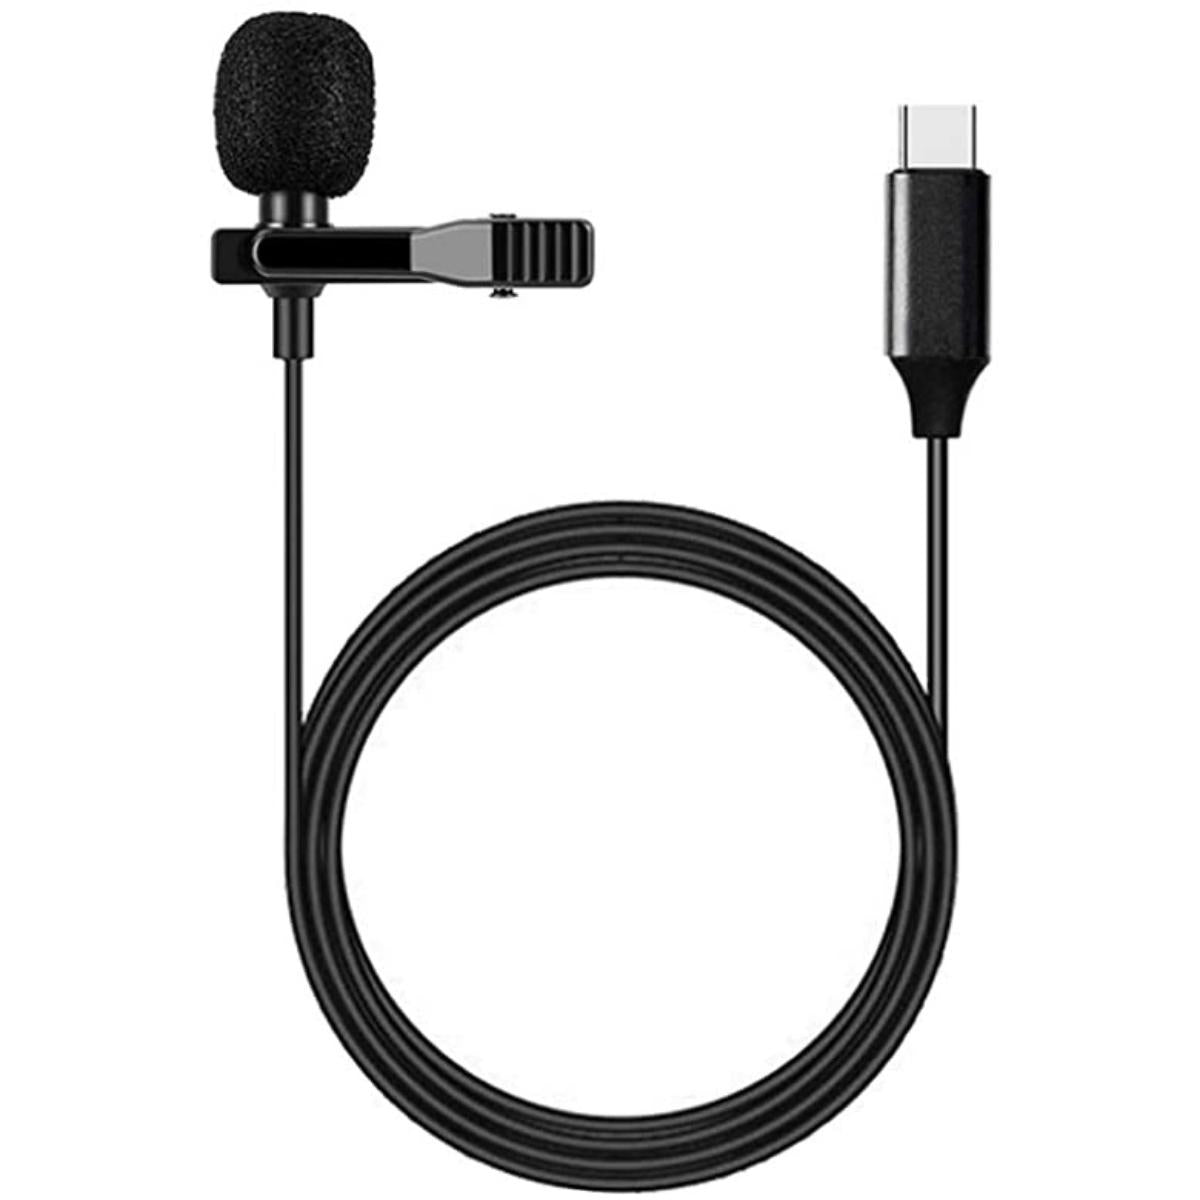 XO-MKF 02/AGTC Lavalier Microphone Type c Microphone / Black / wired